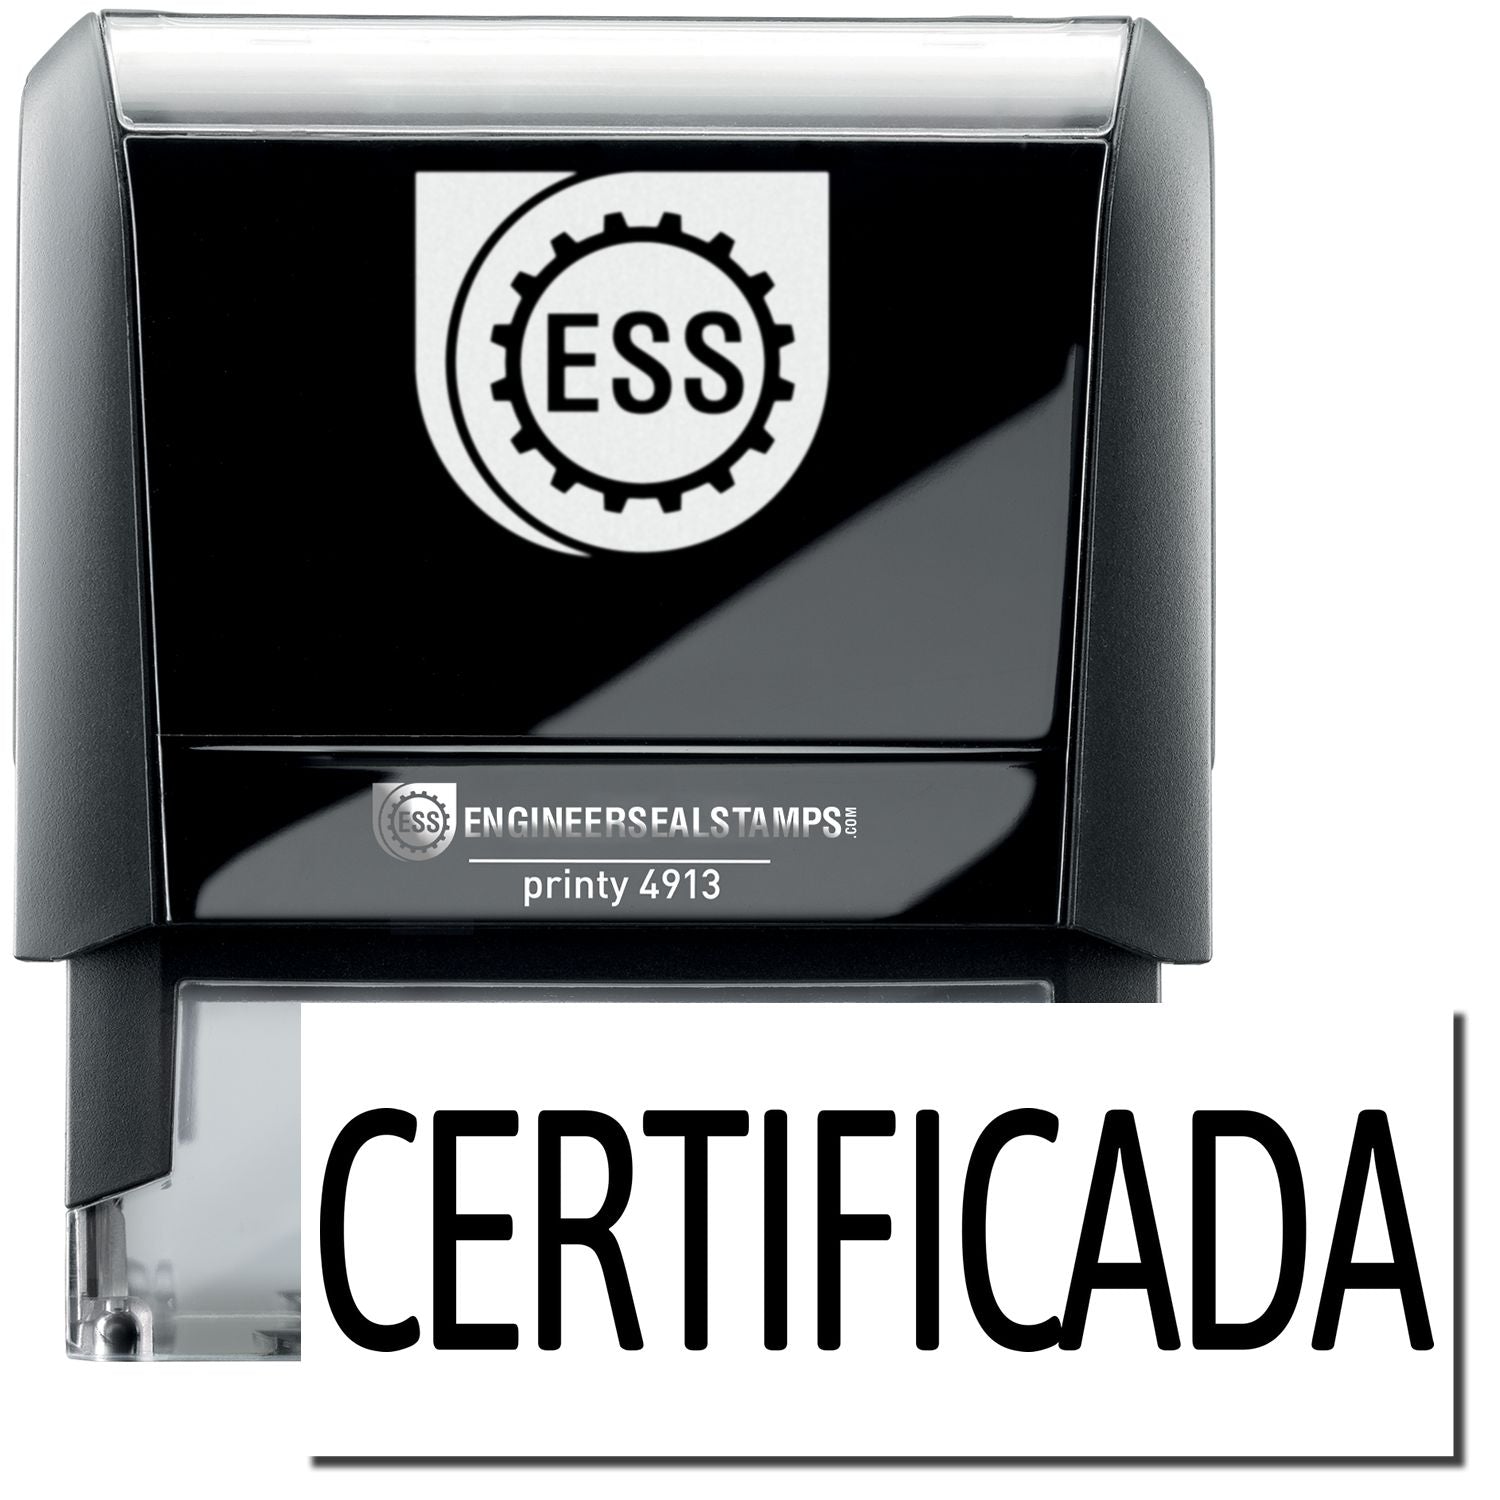 A self-inking stamp with a stamped image showing how the text "CERTIFICADA" in a large font is displayed by it after stamping.